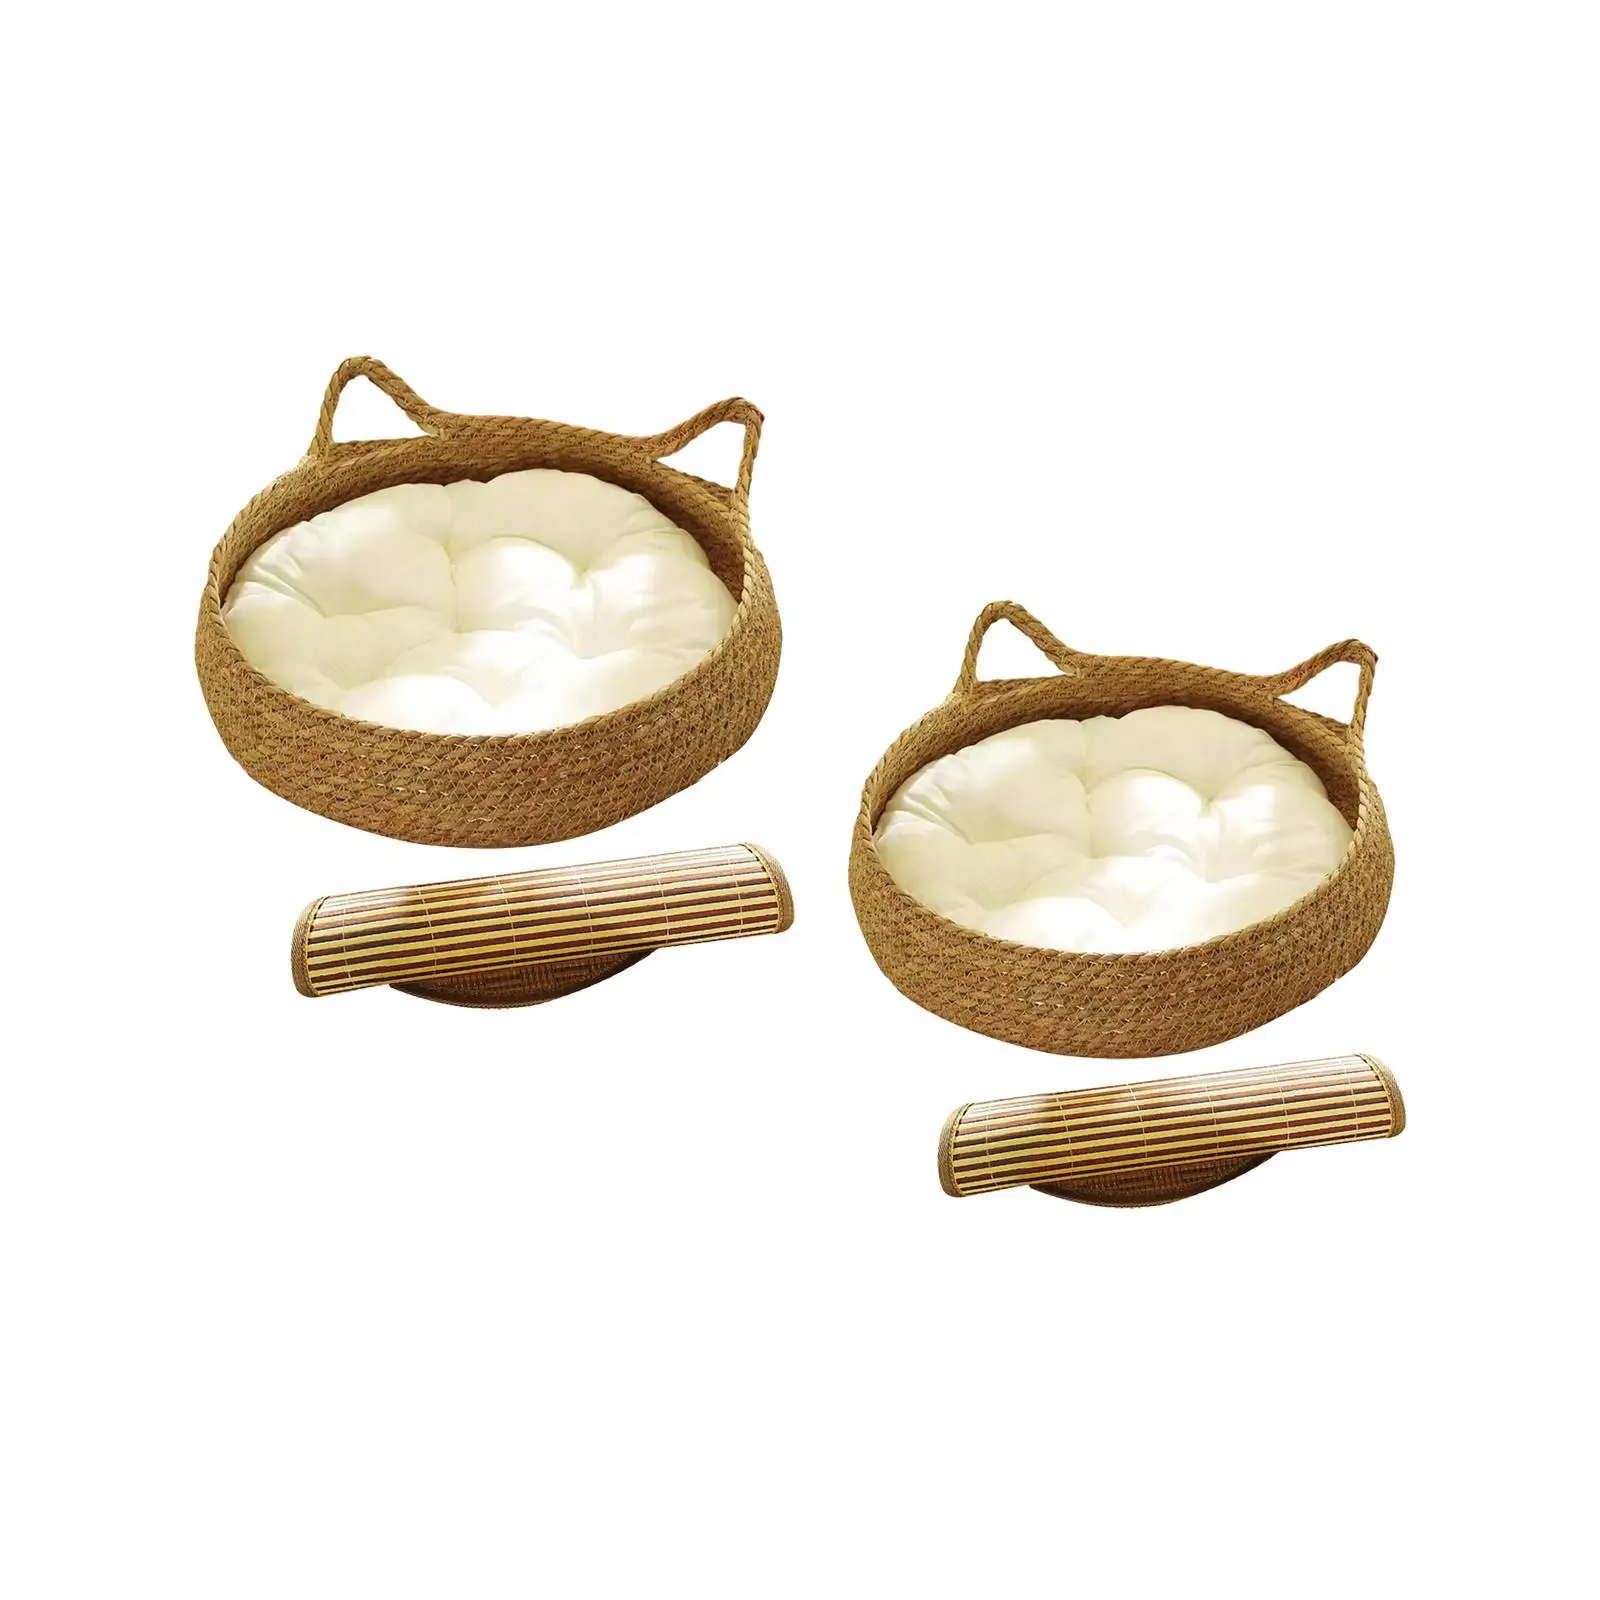 Cat Bed Basket Furniture Protector Pet Cat Sleeping Bed Comfortable Cat Scratching Board for Puppy Small Dogs Rabbit Large Cats